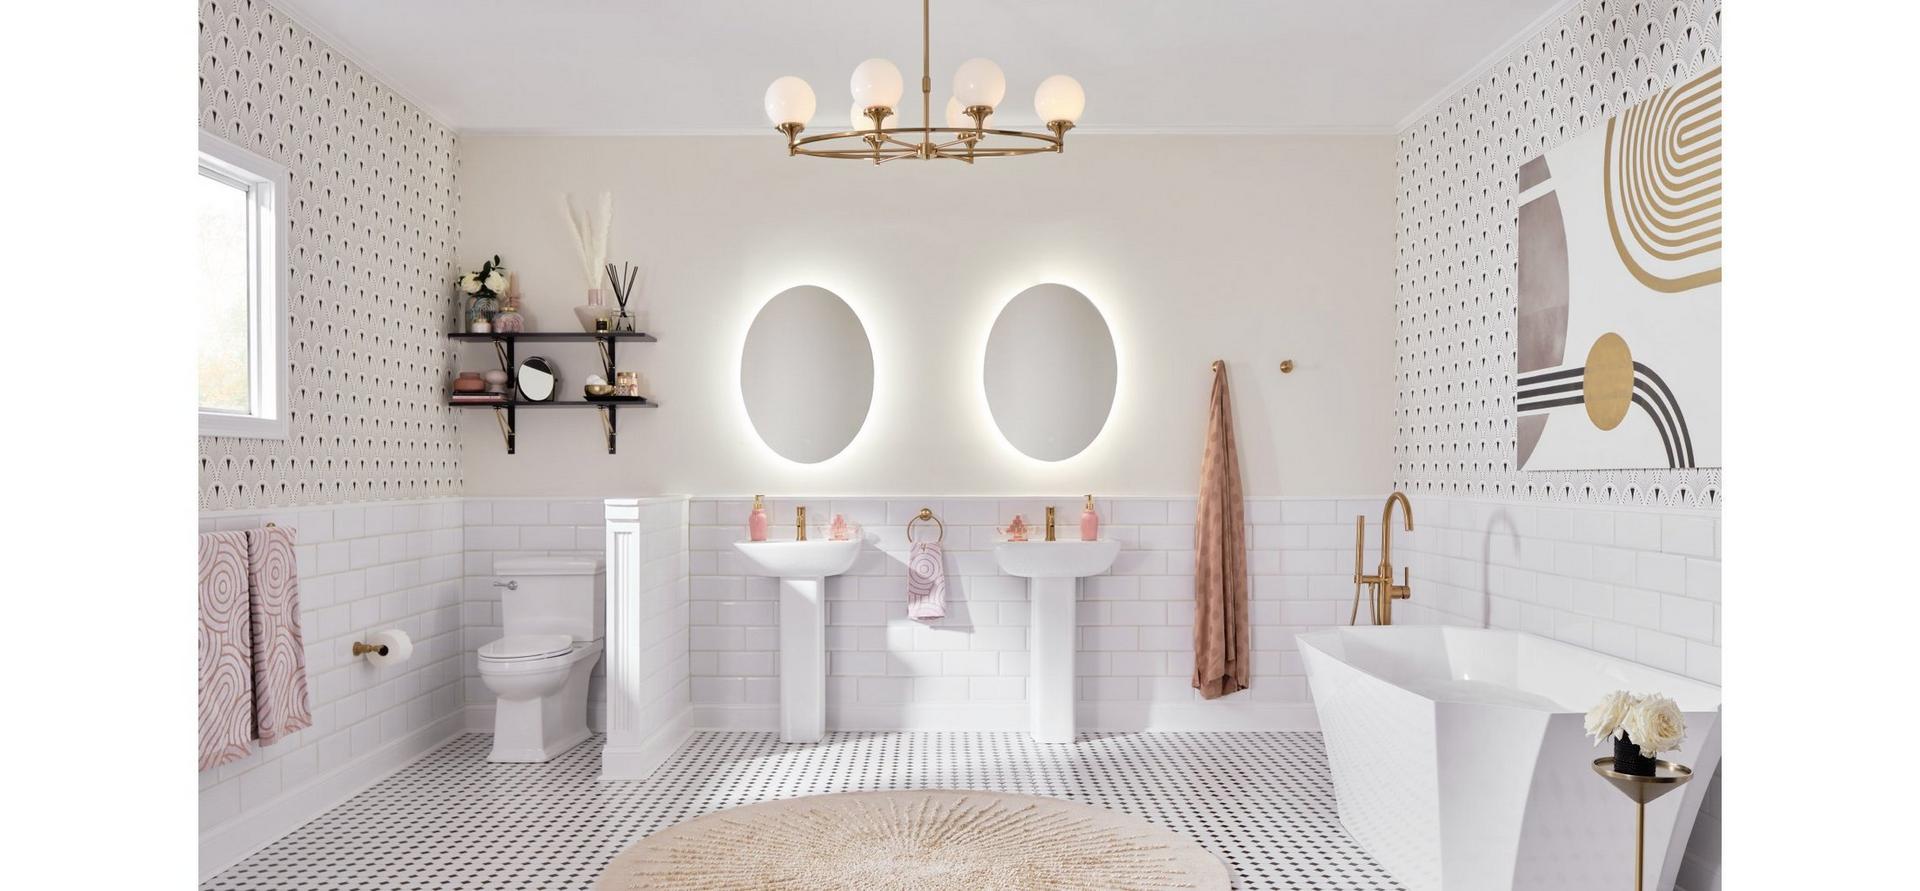 Glam style bathroom with the Alfaro 6-Light Chandelier, Lentz Single-Hole Bathroom Faucet, Tub Faucet, Towel Bar in Brushed Gold